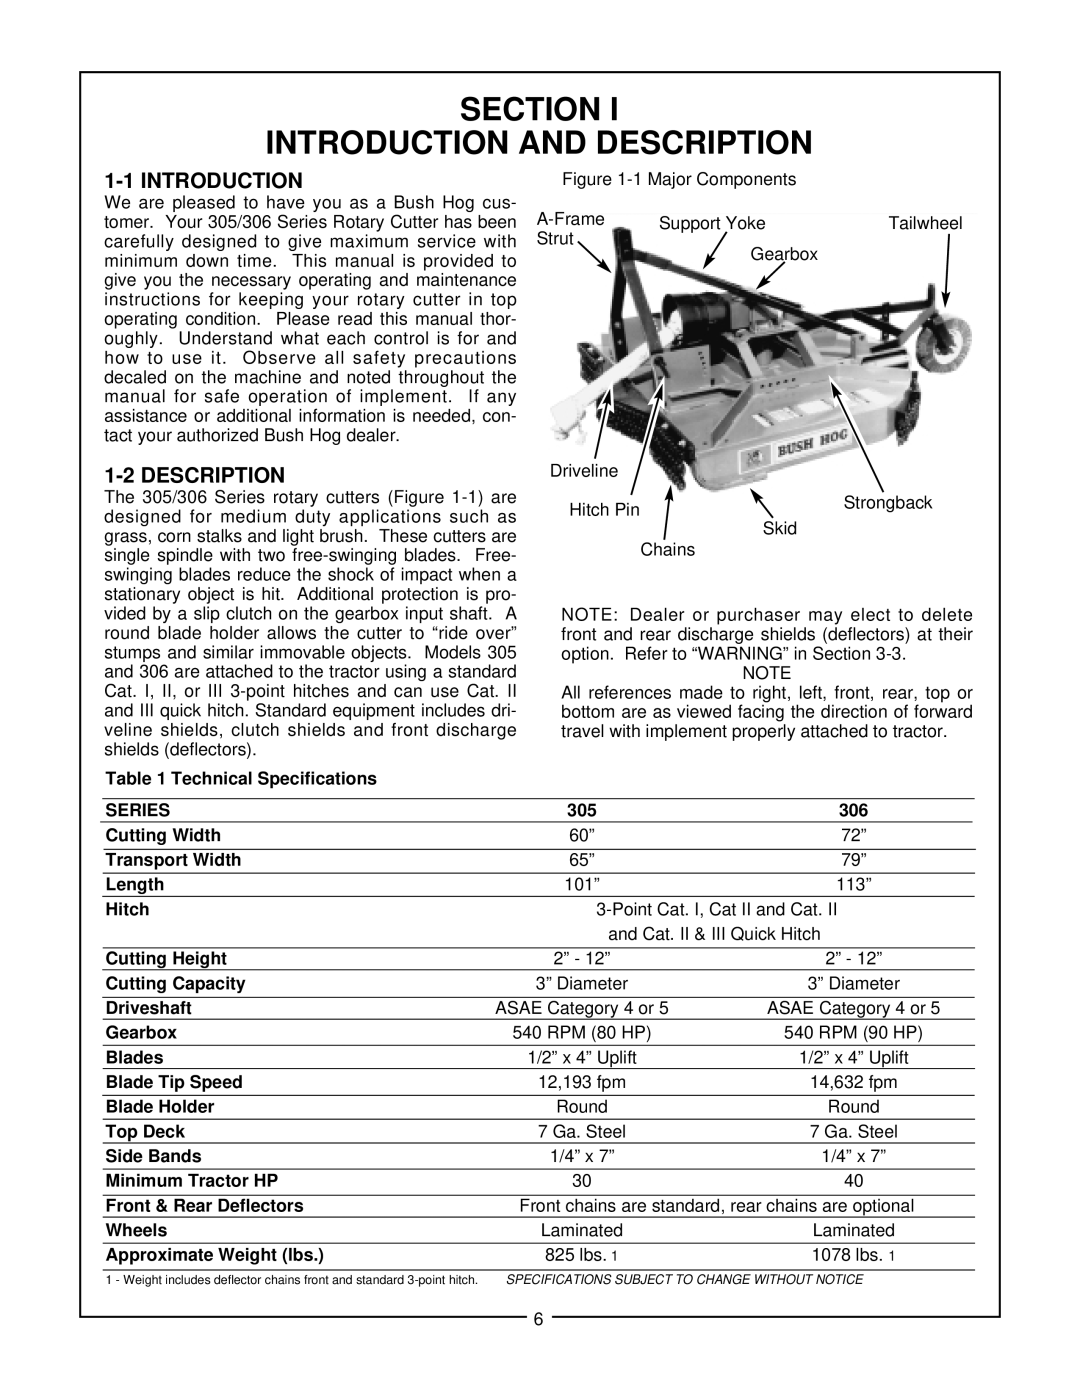 Bush Hog 305, 306 manual Section Introduction And Description, 1-1INTRODUCTION, 1-2DESCRIPTION 